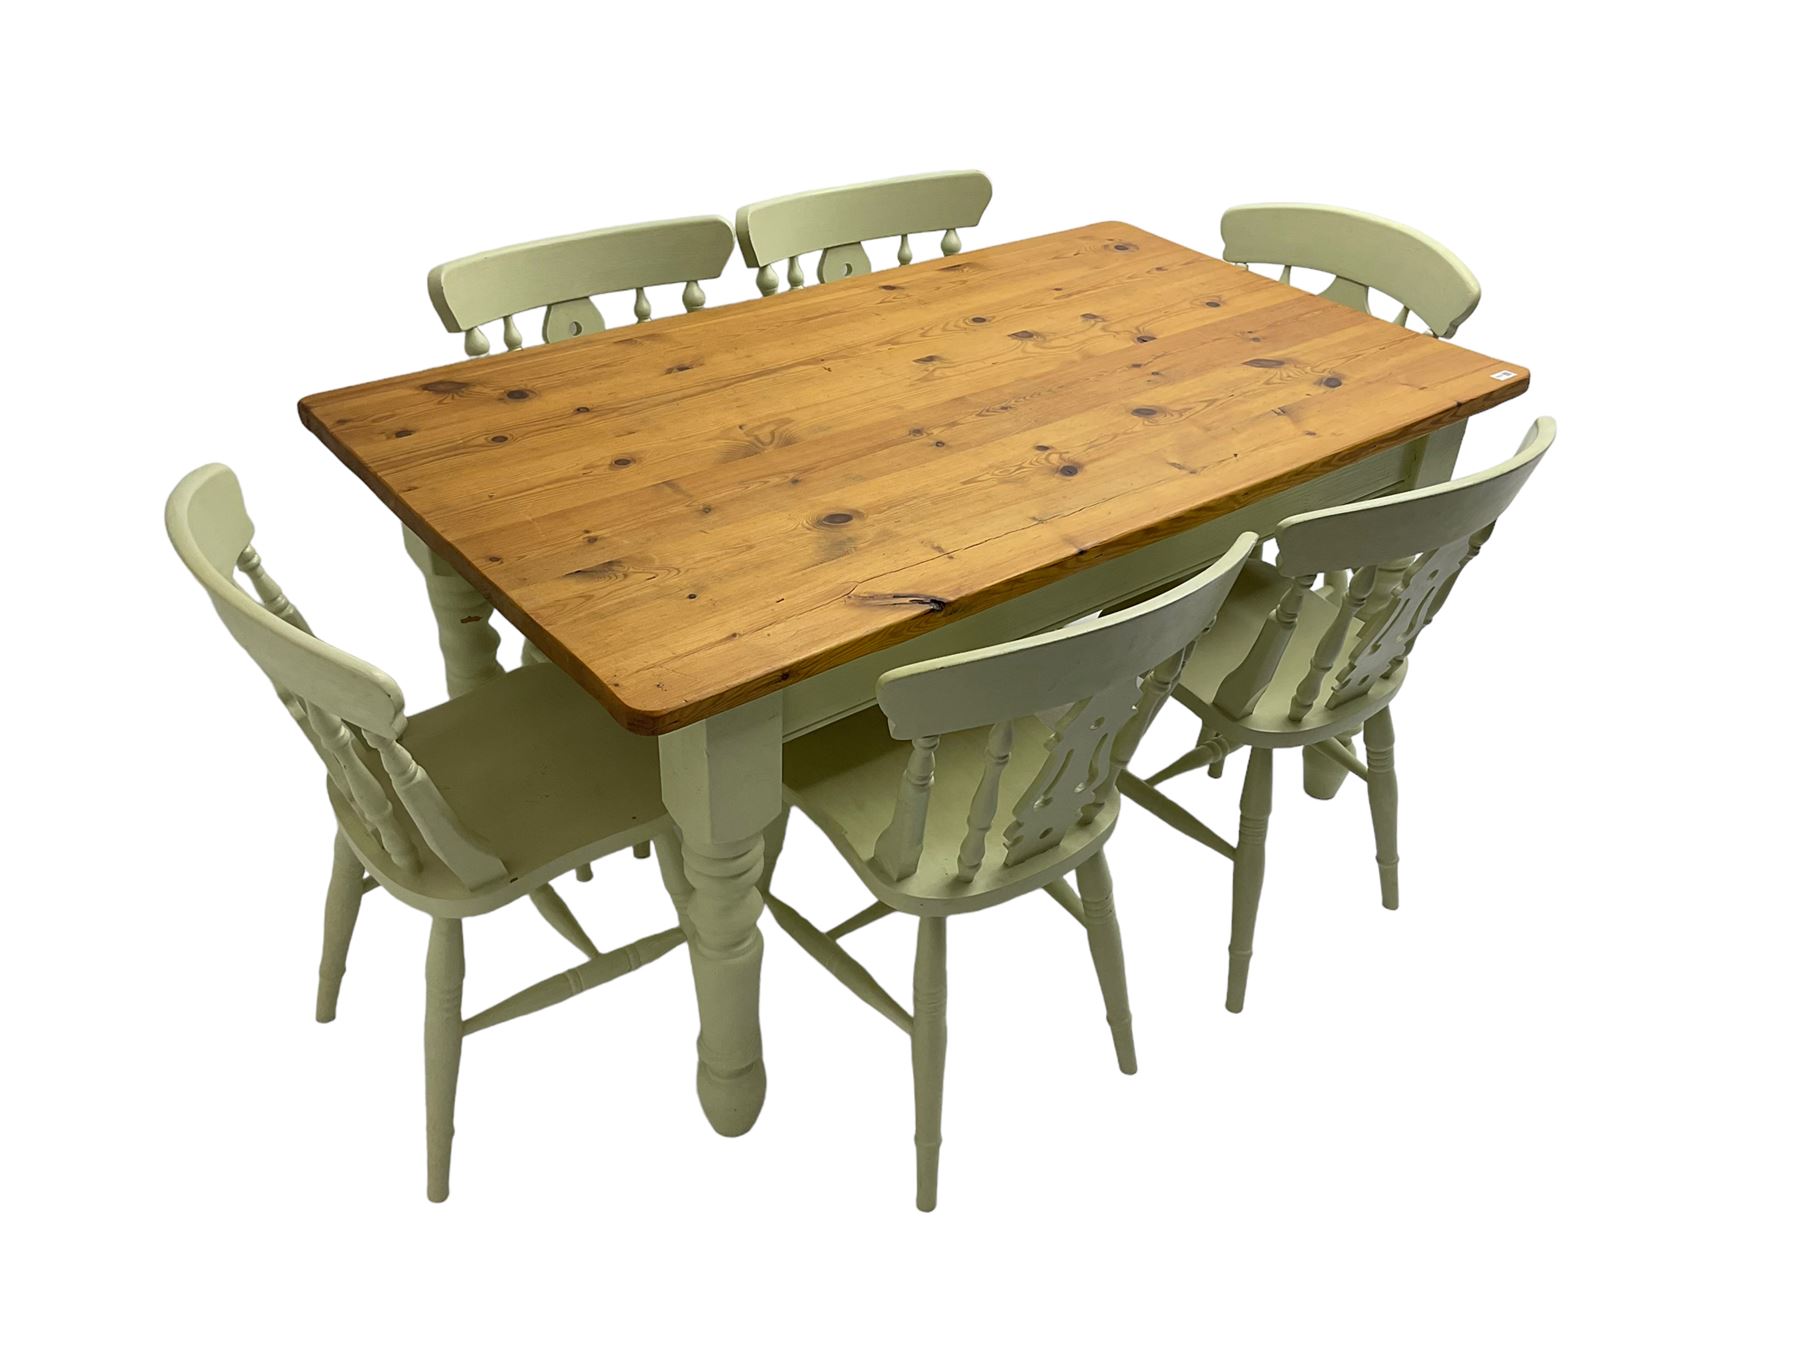 Traditional farmhouse pine dining table - Image 6 of 9